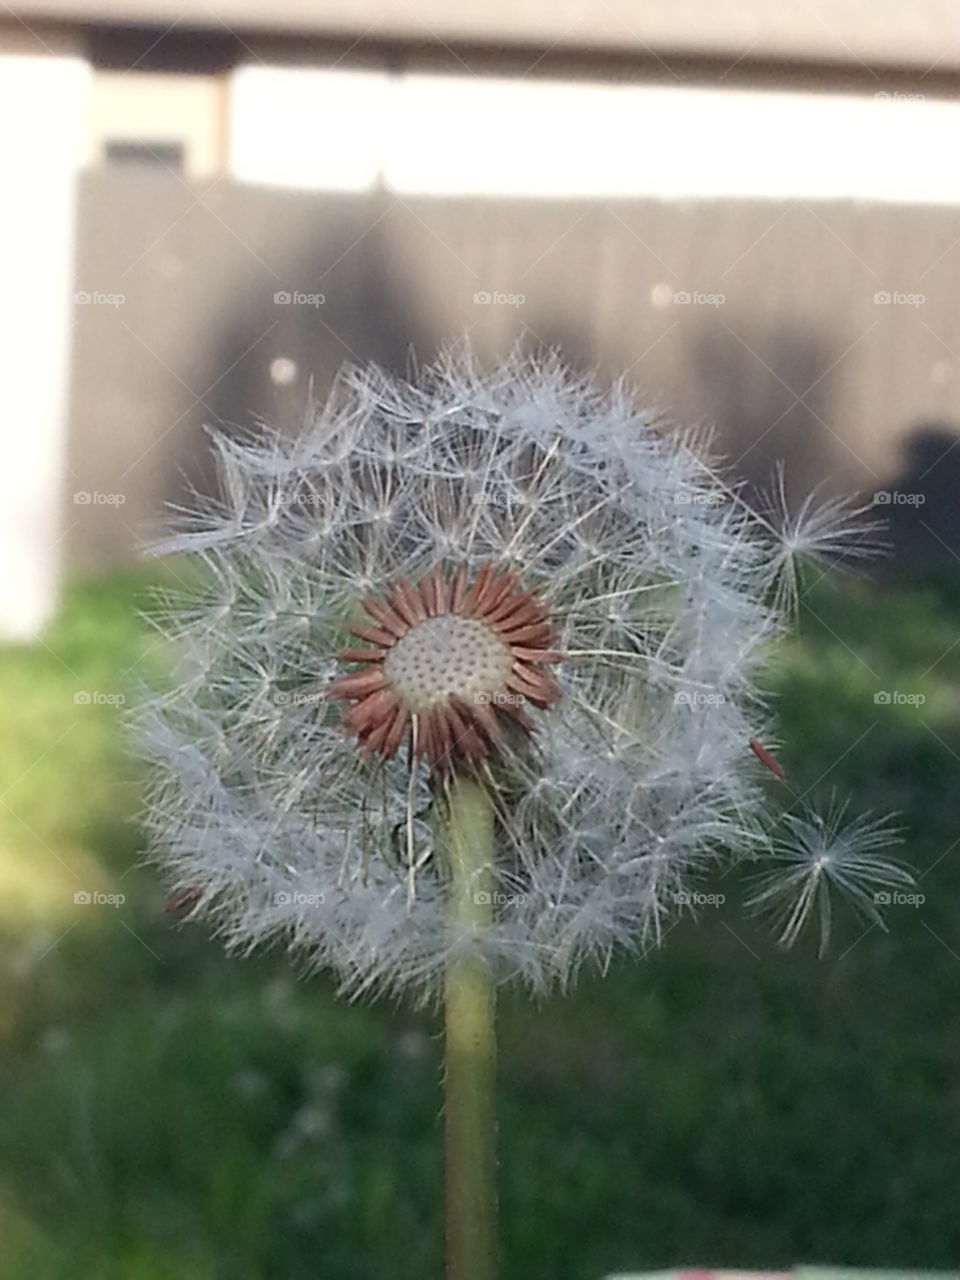 Dandelion #1. My daughter loves to wish on dandelions. This photo, along with several others show the progression of a dandelion being blown away.